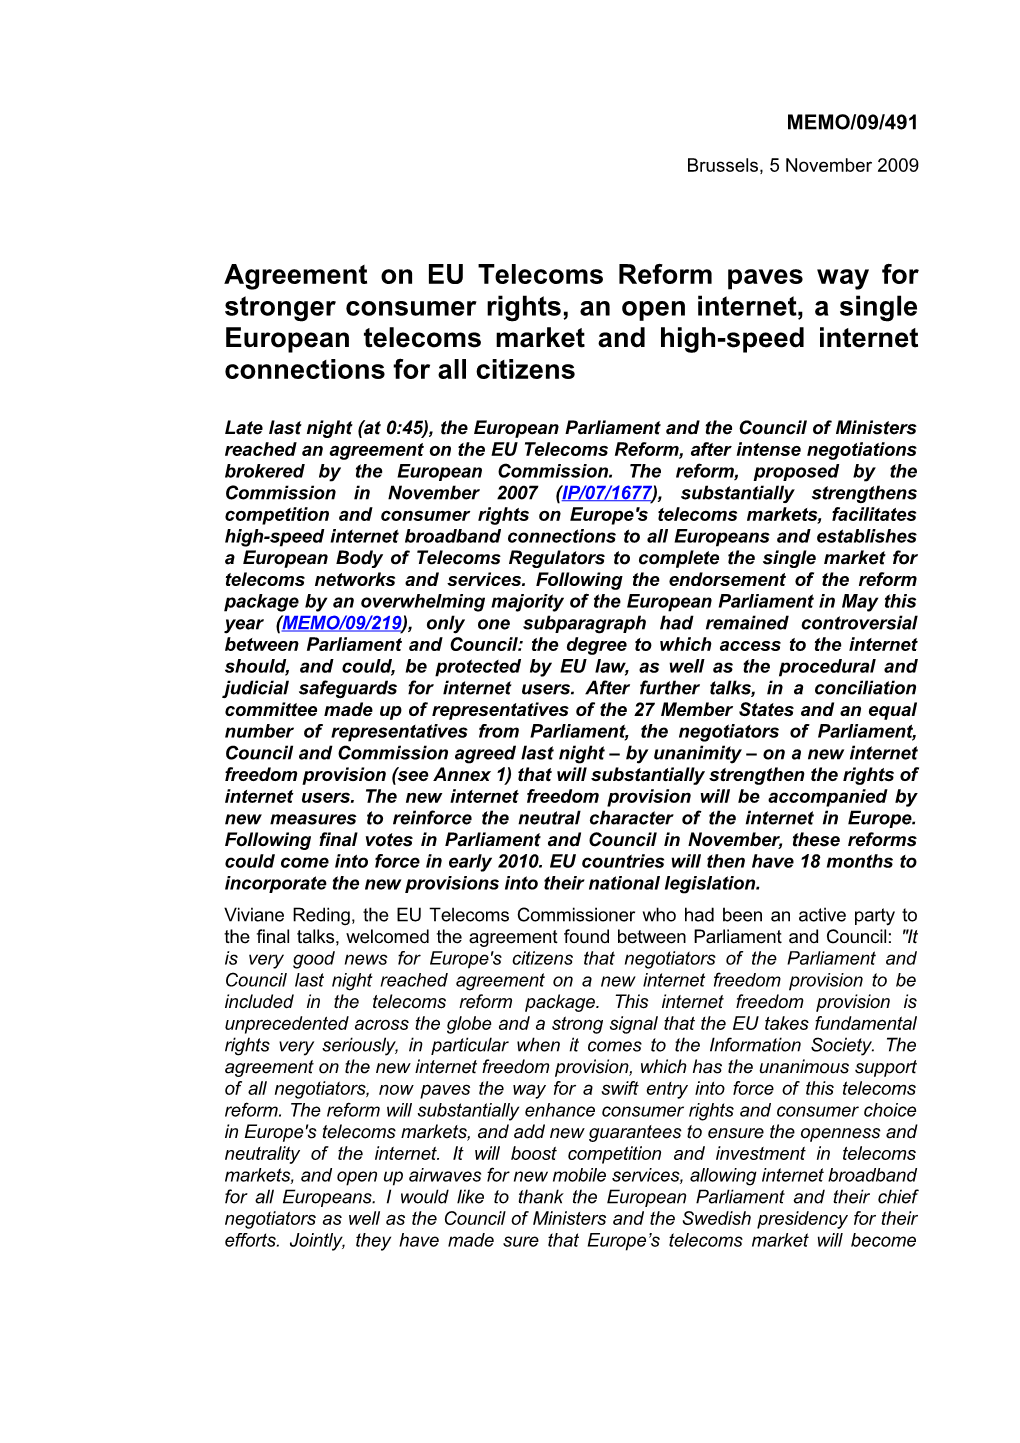 Agreement on EU Telecoms Reform Paves Way for Stronger Consumer Rights, an Open Internet